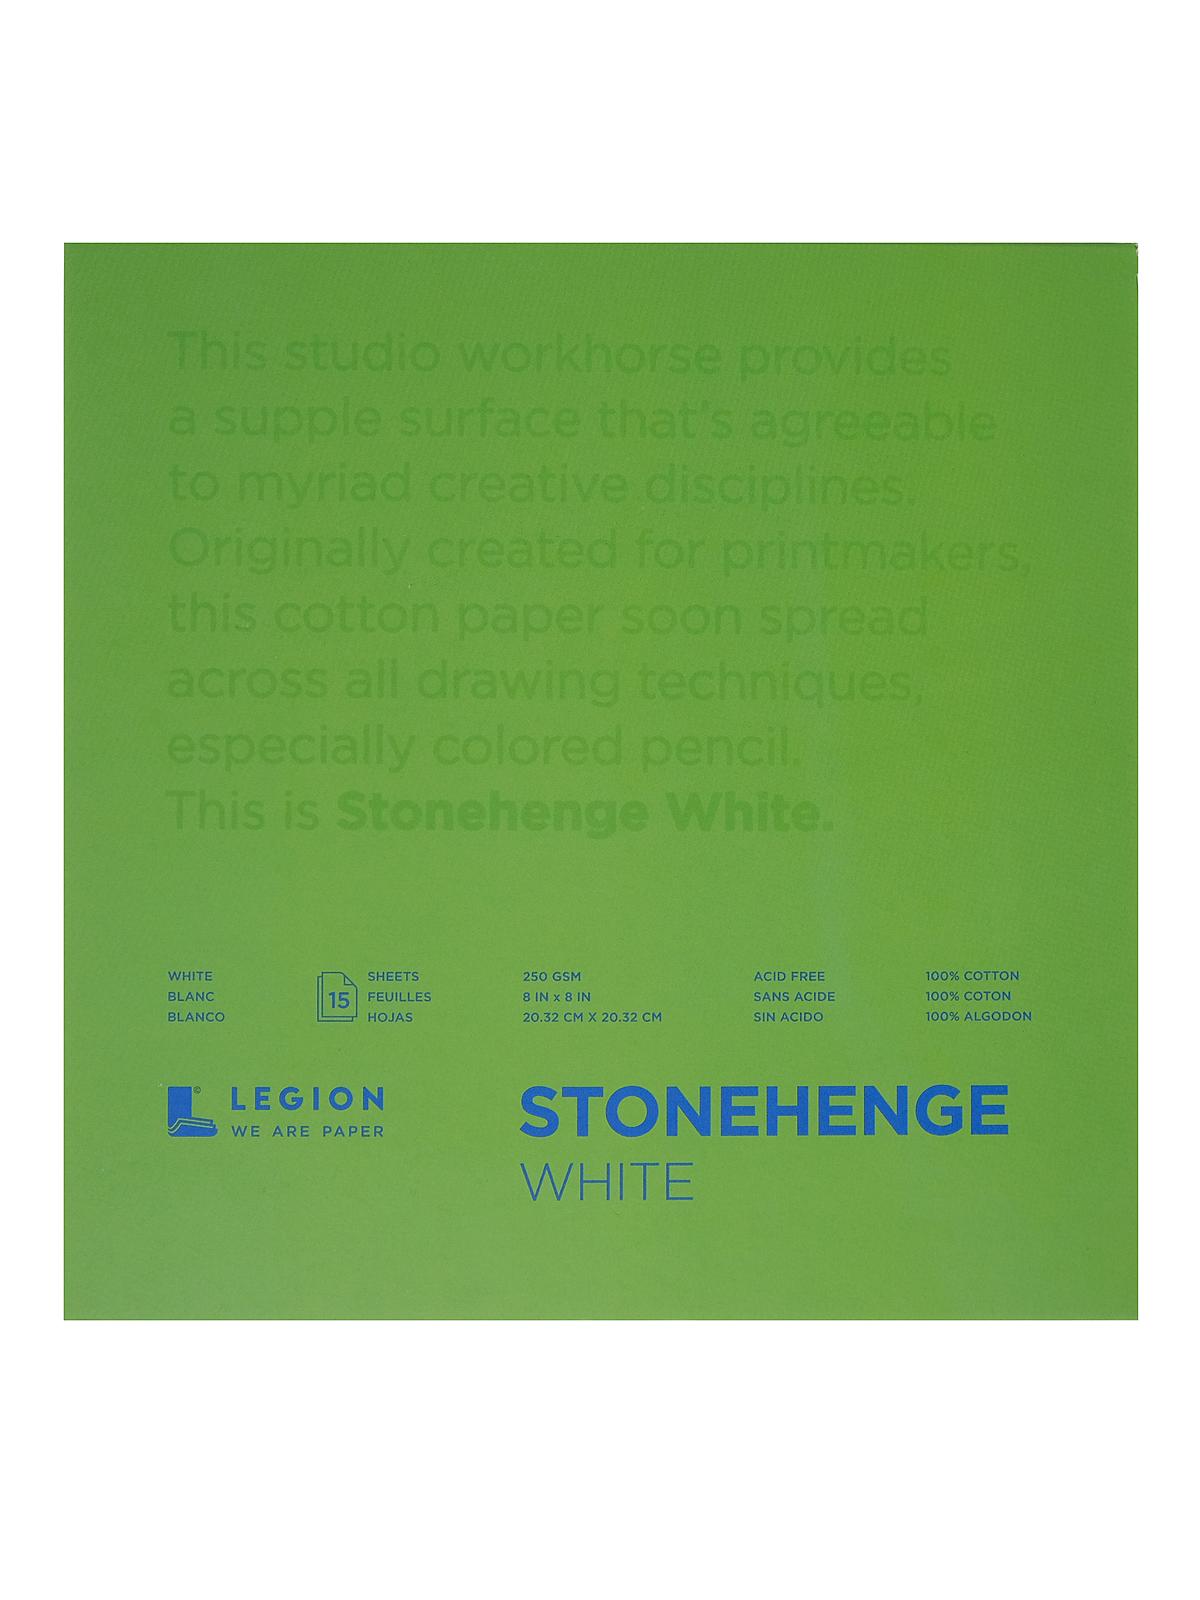 Stonehenge Drawing Pads 8 In. X 8 In. 15 Sheets